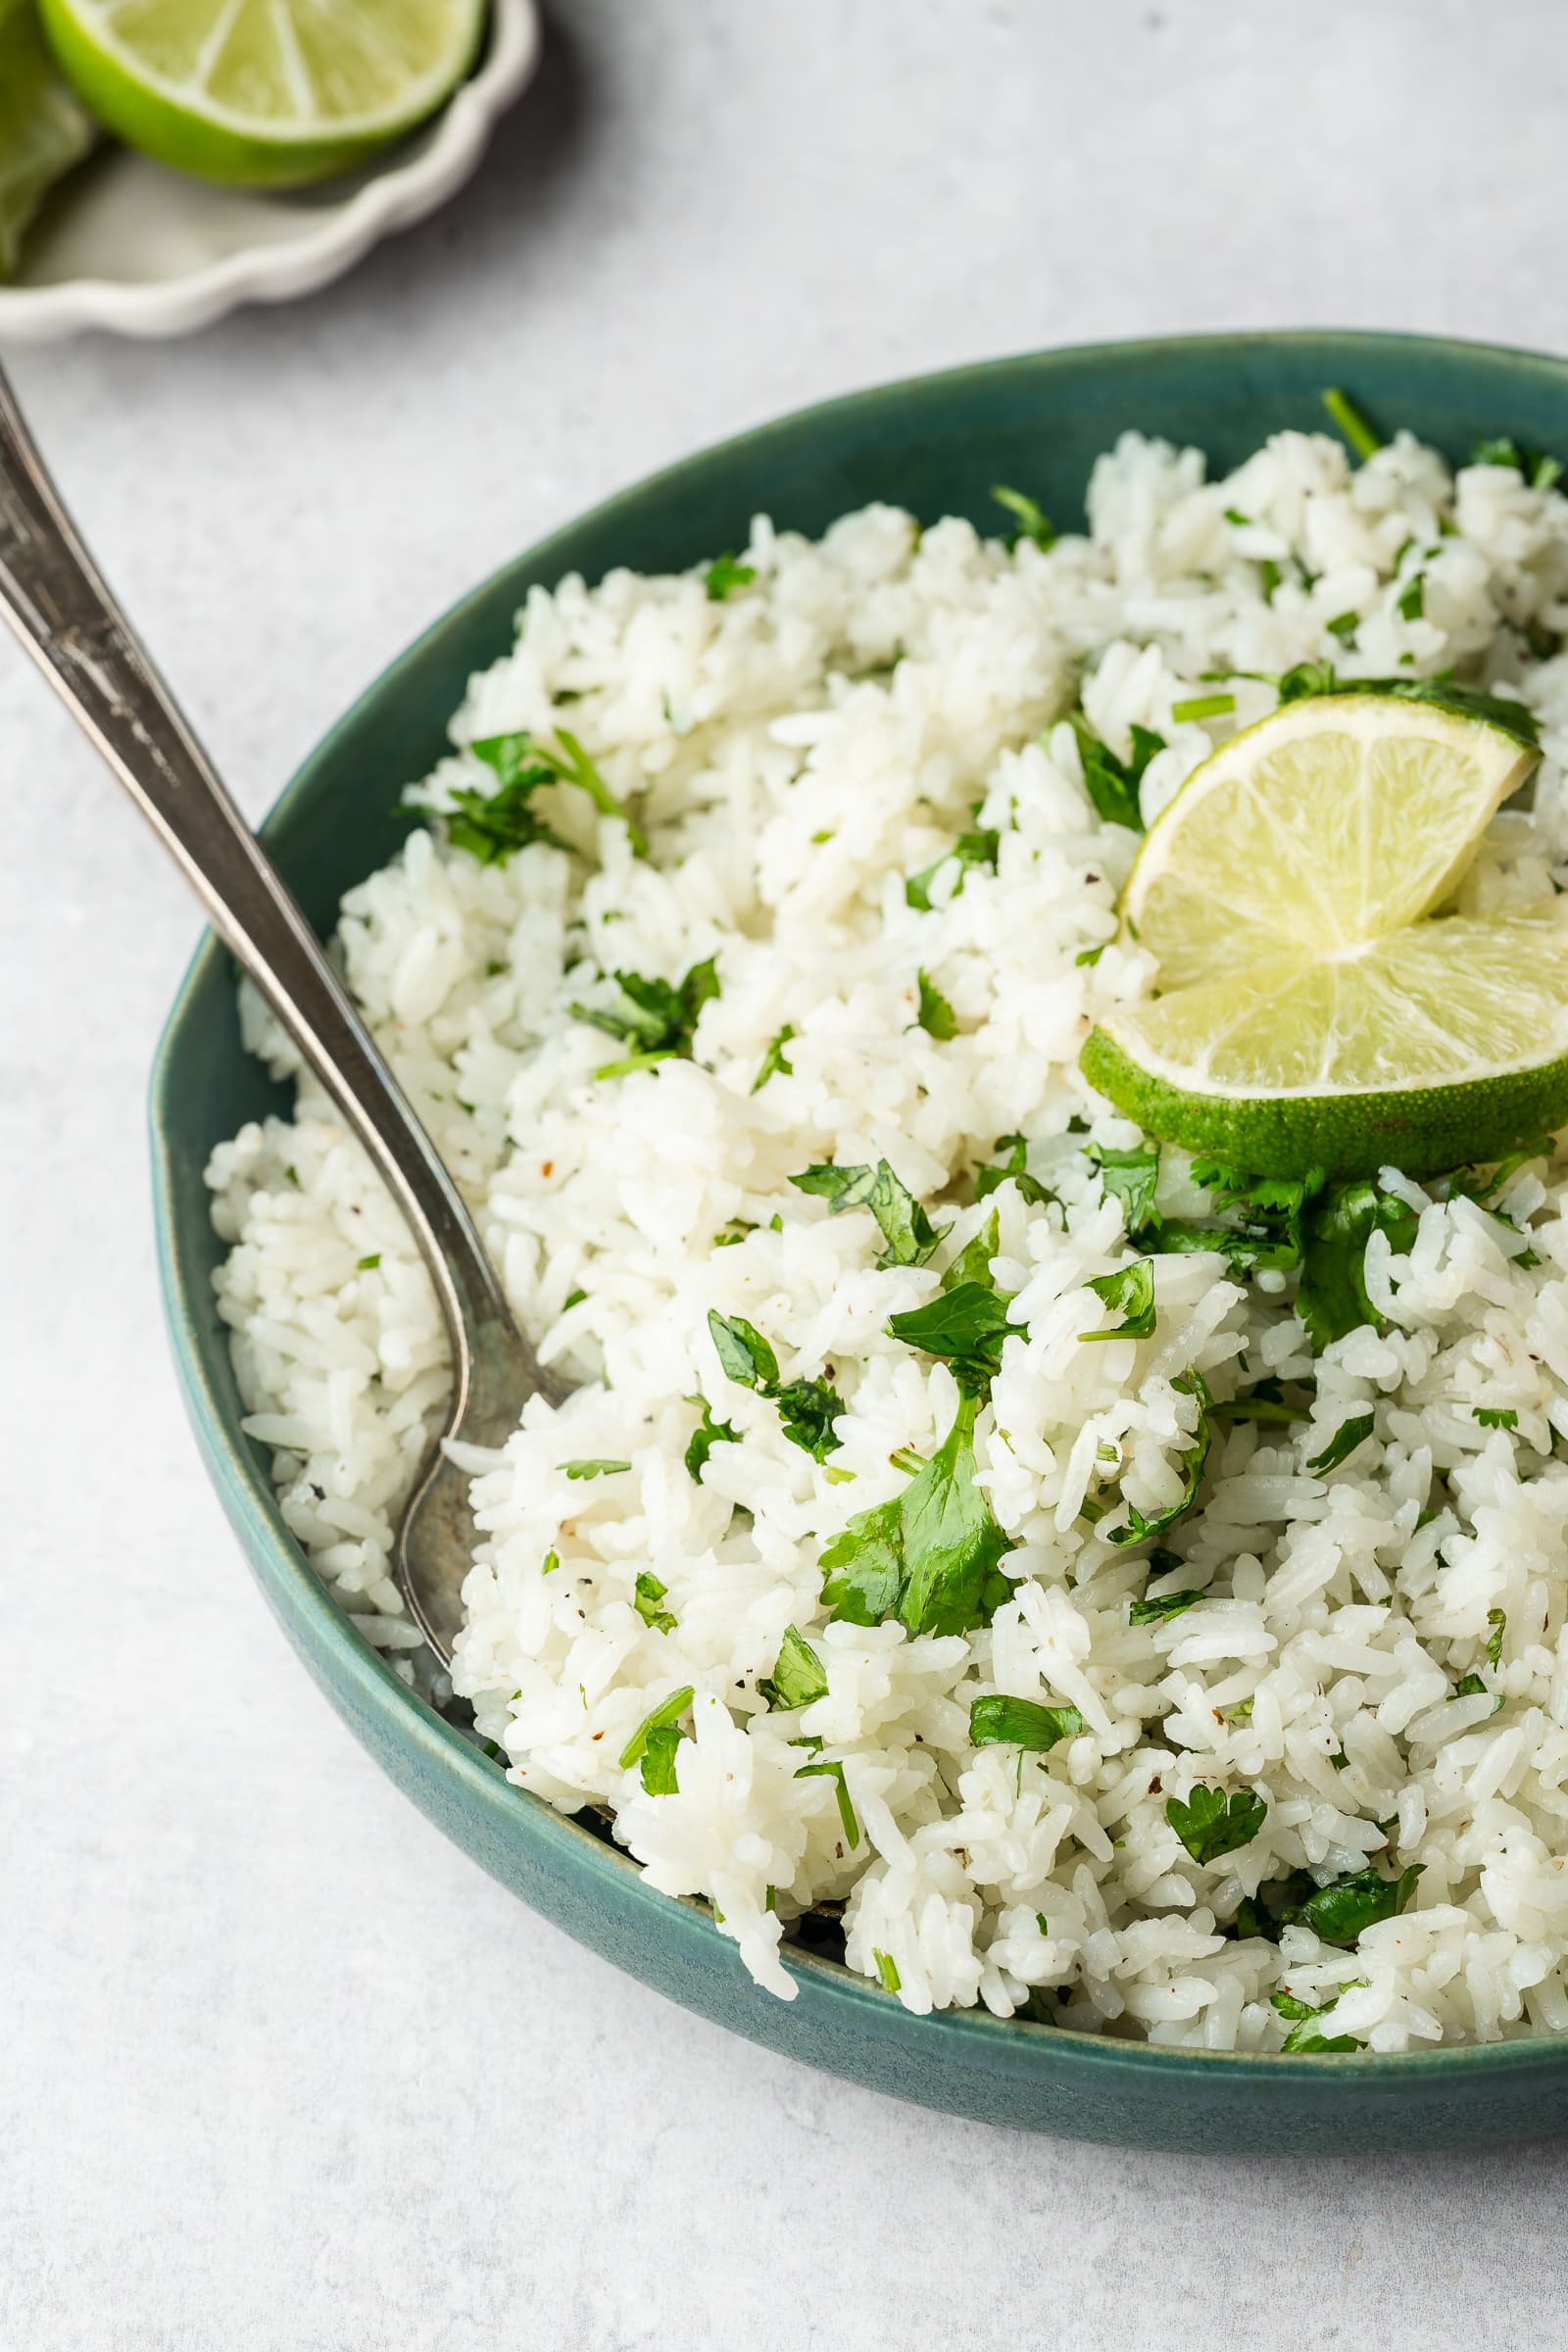 Cilantro lime rice in a serving dish garnished with lime.